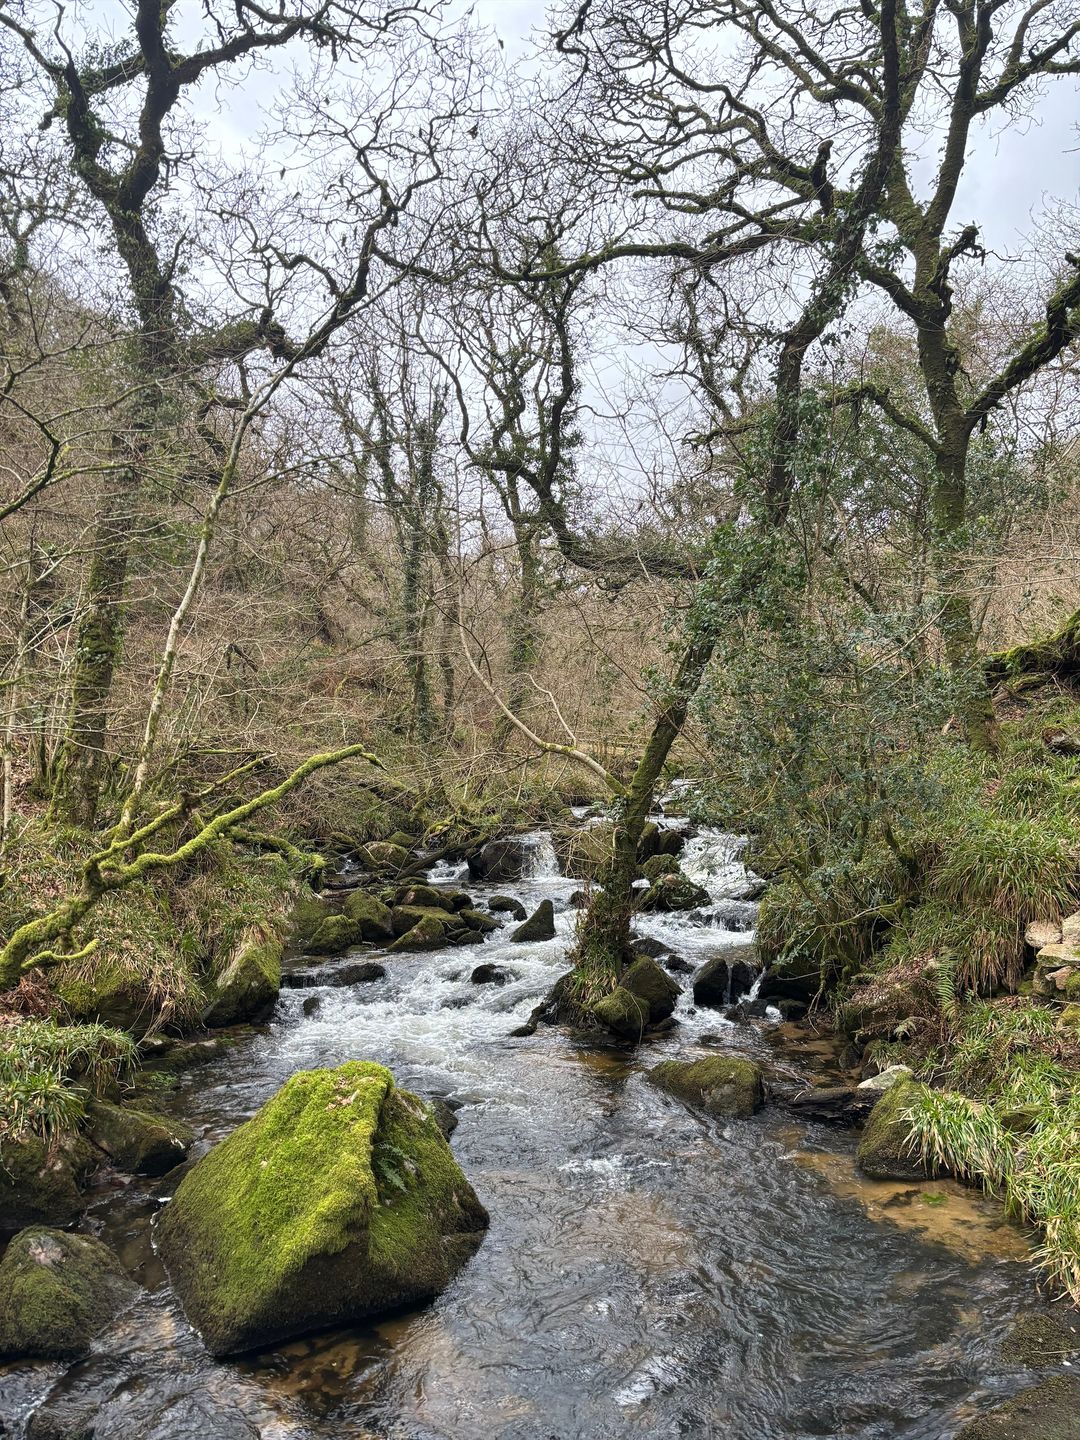 A picture of a river, moss rocks and trees in the UK countryside